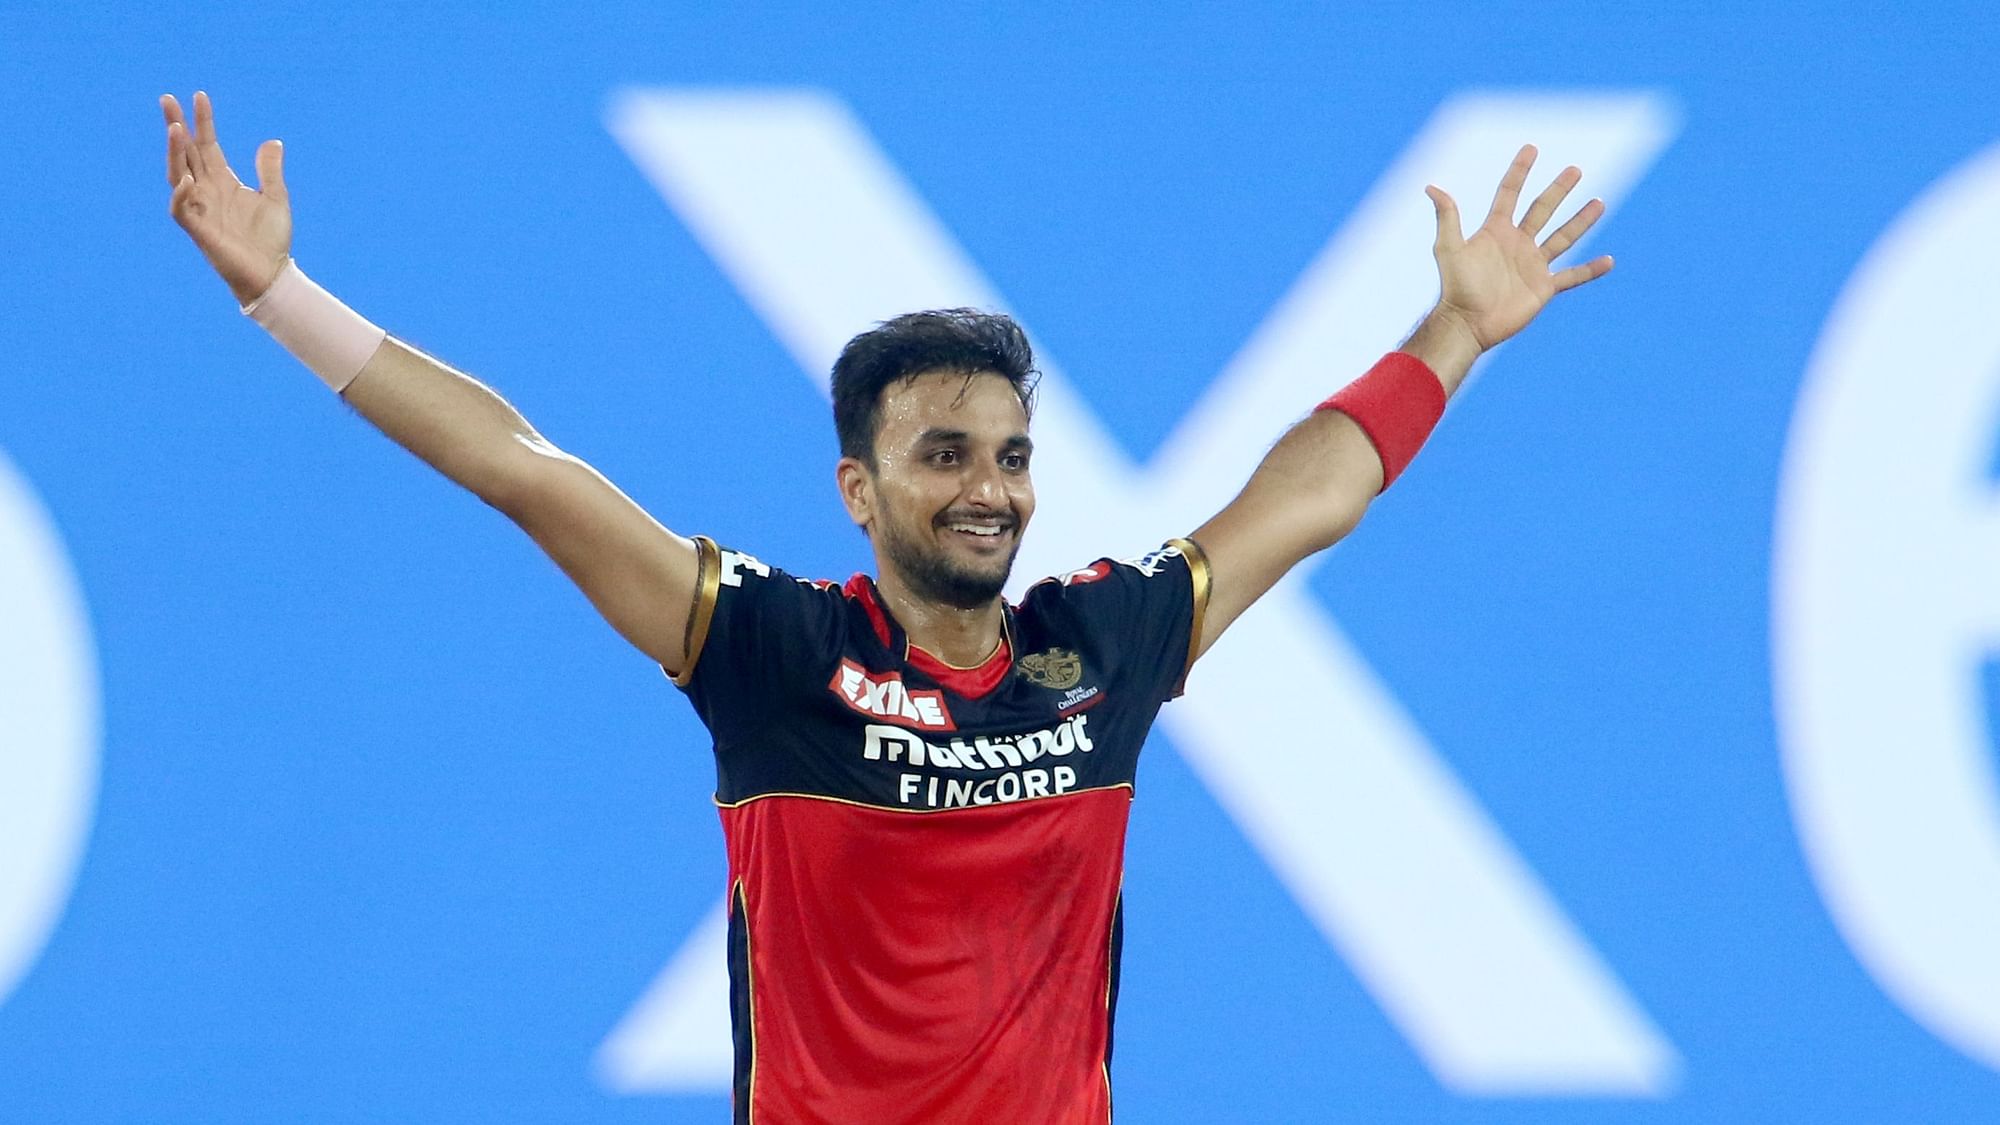 RCB used 7 bowlers in the IPL-opener against Mumbai and Harshal Patel picked up a fifer.